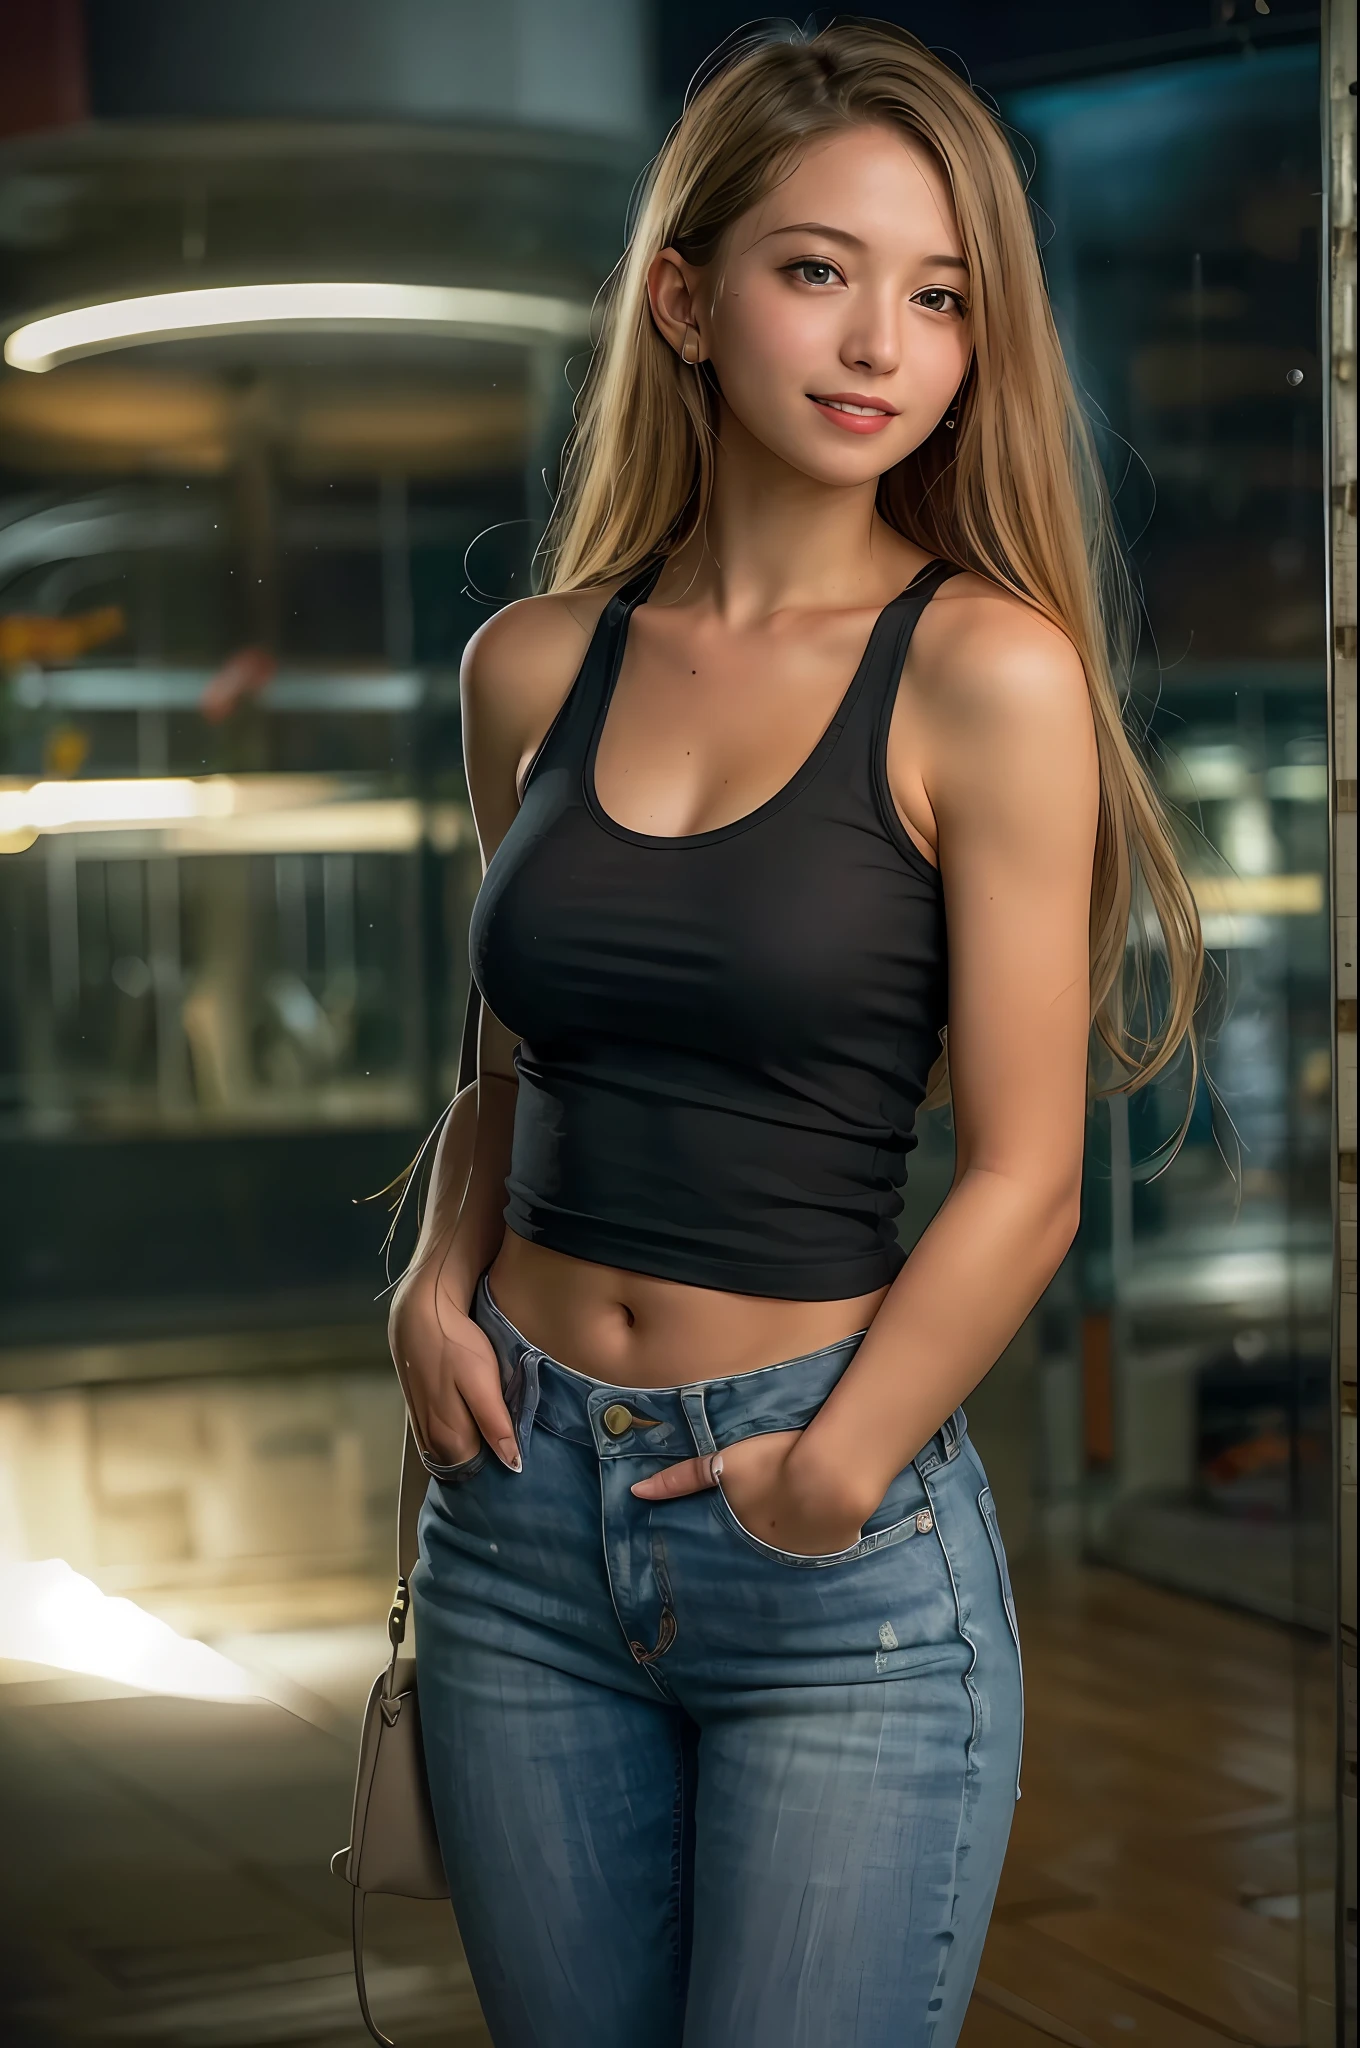 Top quality, Masterpiece, Photoreal, 8K, 4K, Extreme resolution, Ultra HD, Dynamic lighting, Real lighting, Sophia Diamond, looking_at_viewer, Smile, Tank top, Jeans,